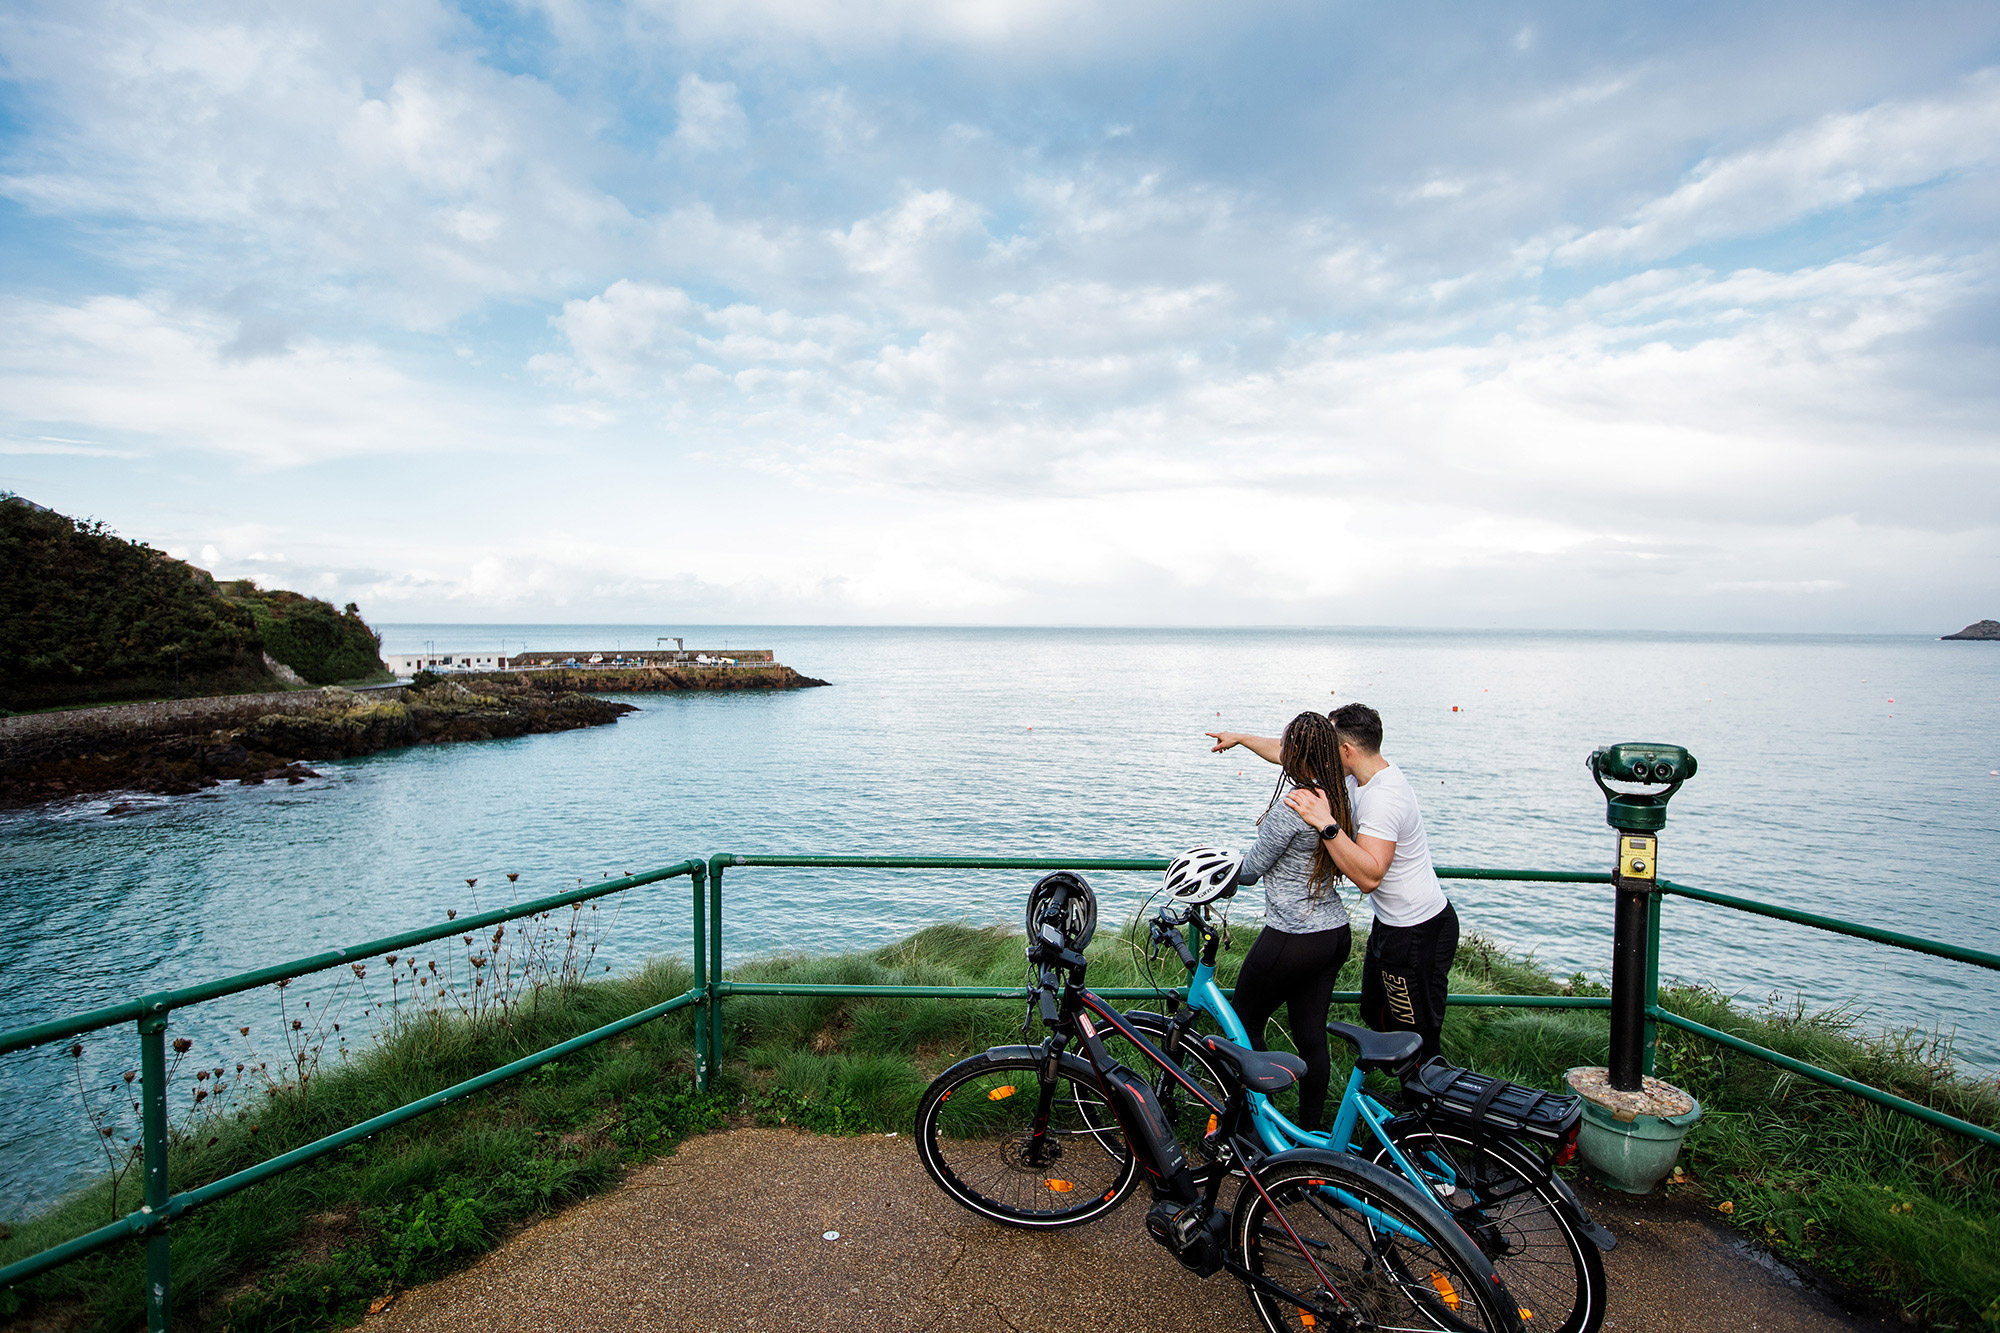  Two cyclists on electric bikes at Bouley Bay.